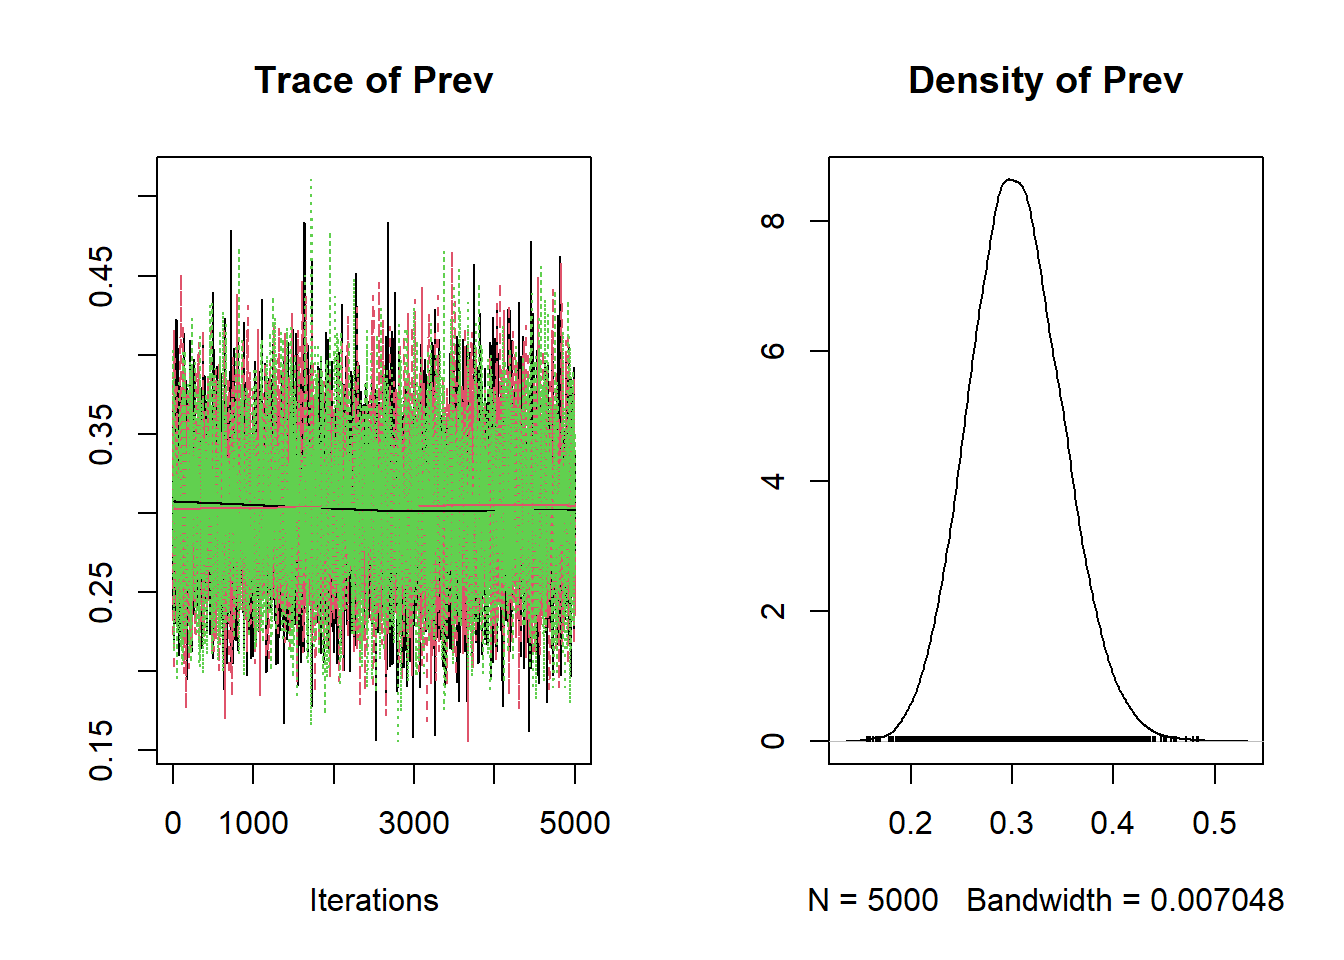 Trace plot and density plot produced using the plot() function.